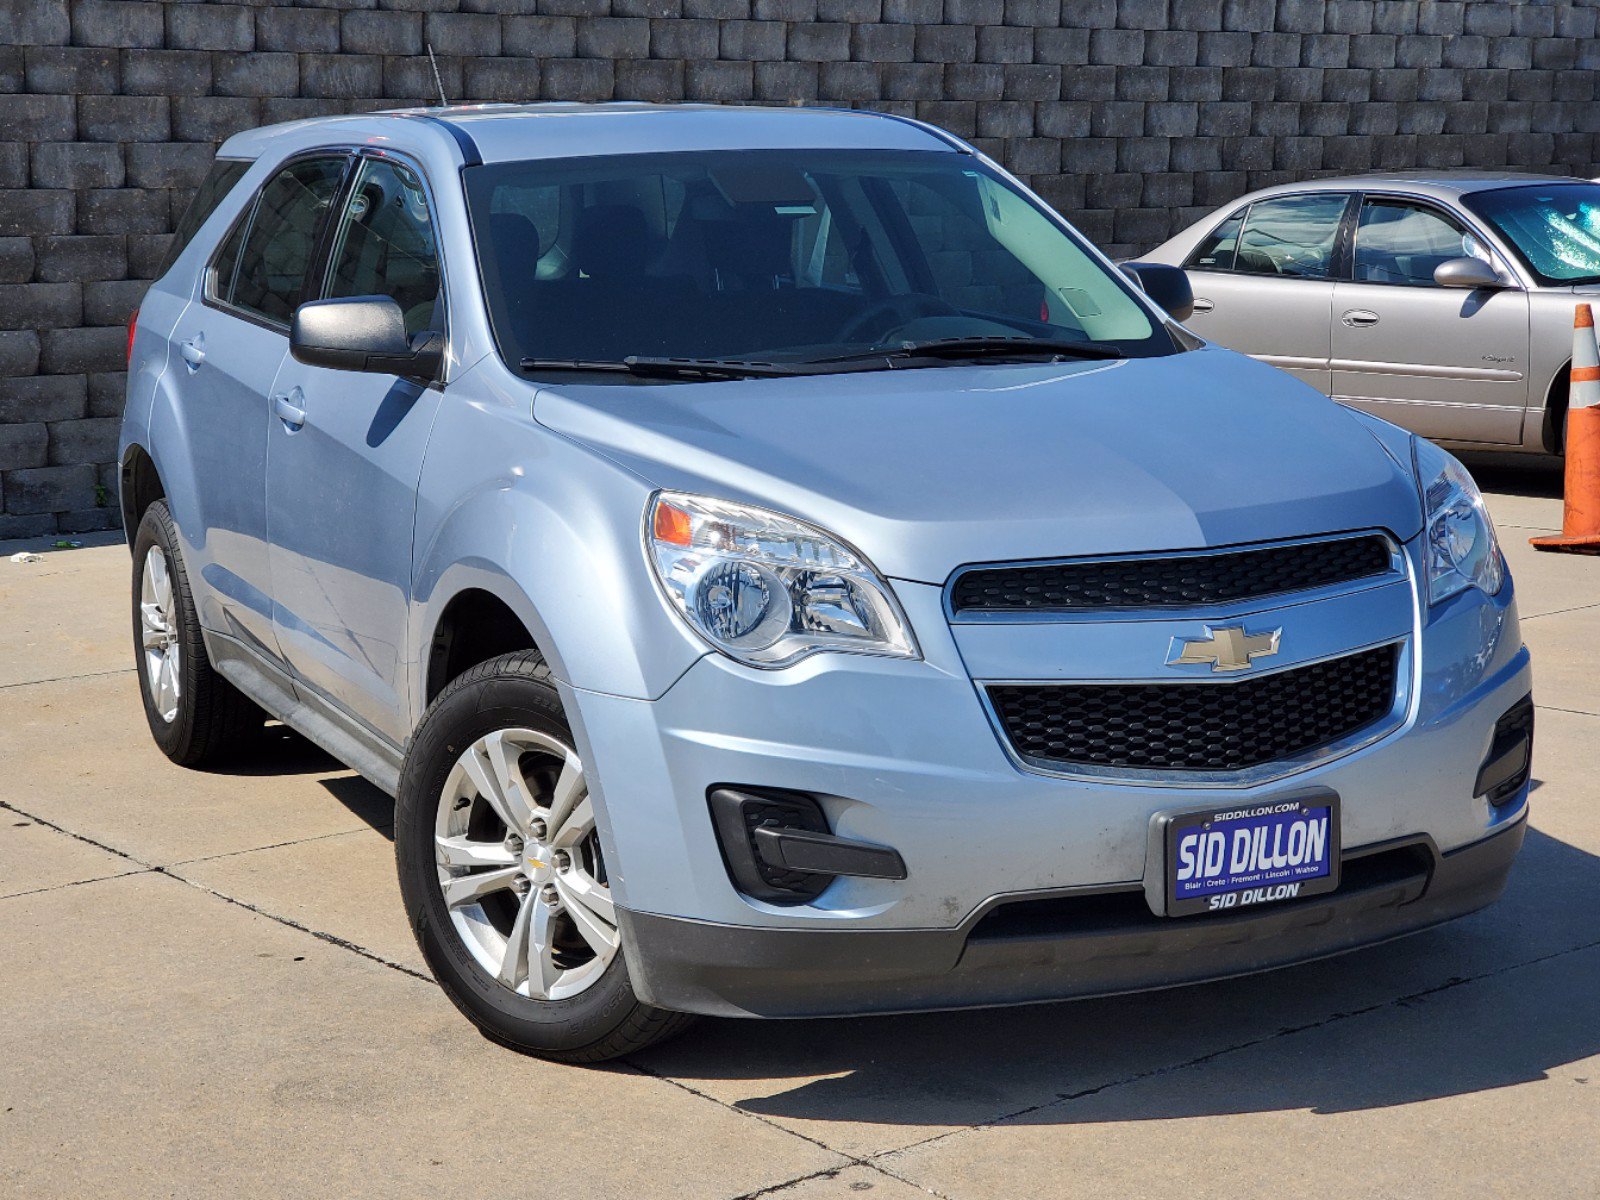 Pre Owned 2015 Chevrolet Equinox Ls Awd Suv